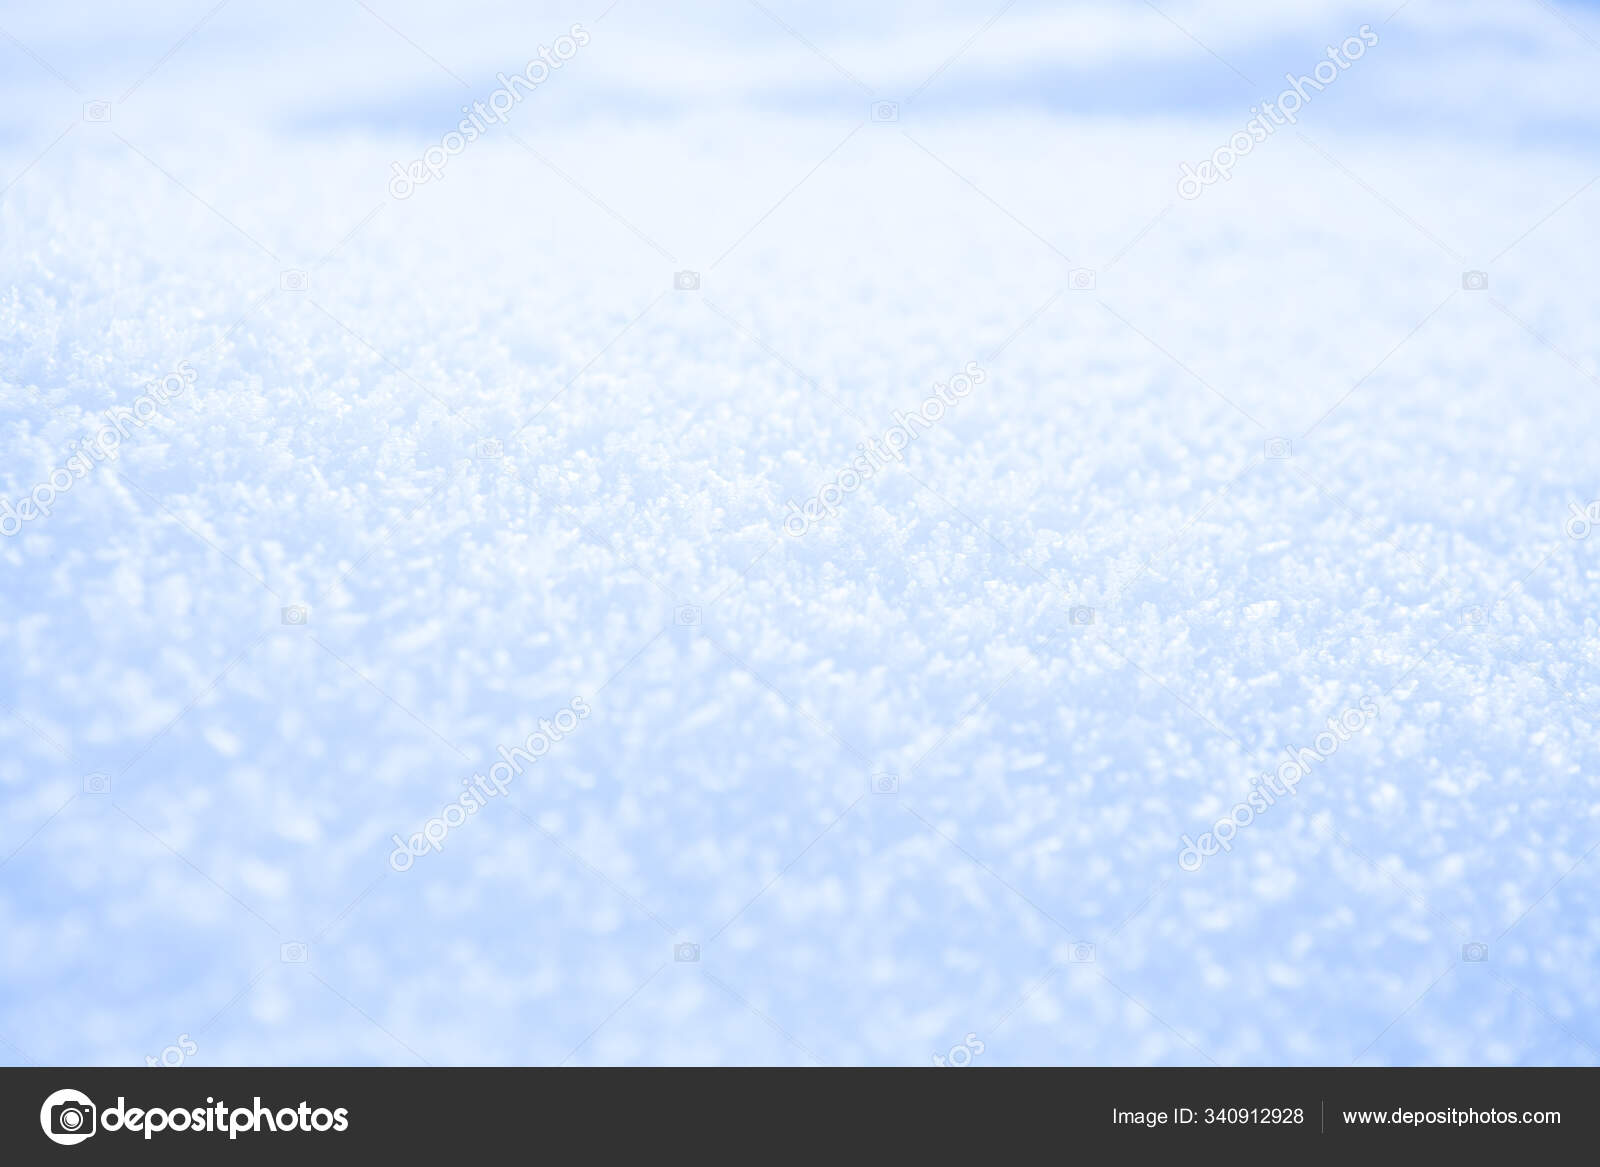 Fresh White Powder Snow Background From Outdoors On Winter Day Stock Photo,  Picture and Royalty Free Image. Image 17907530.